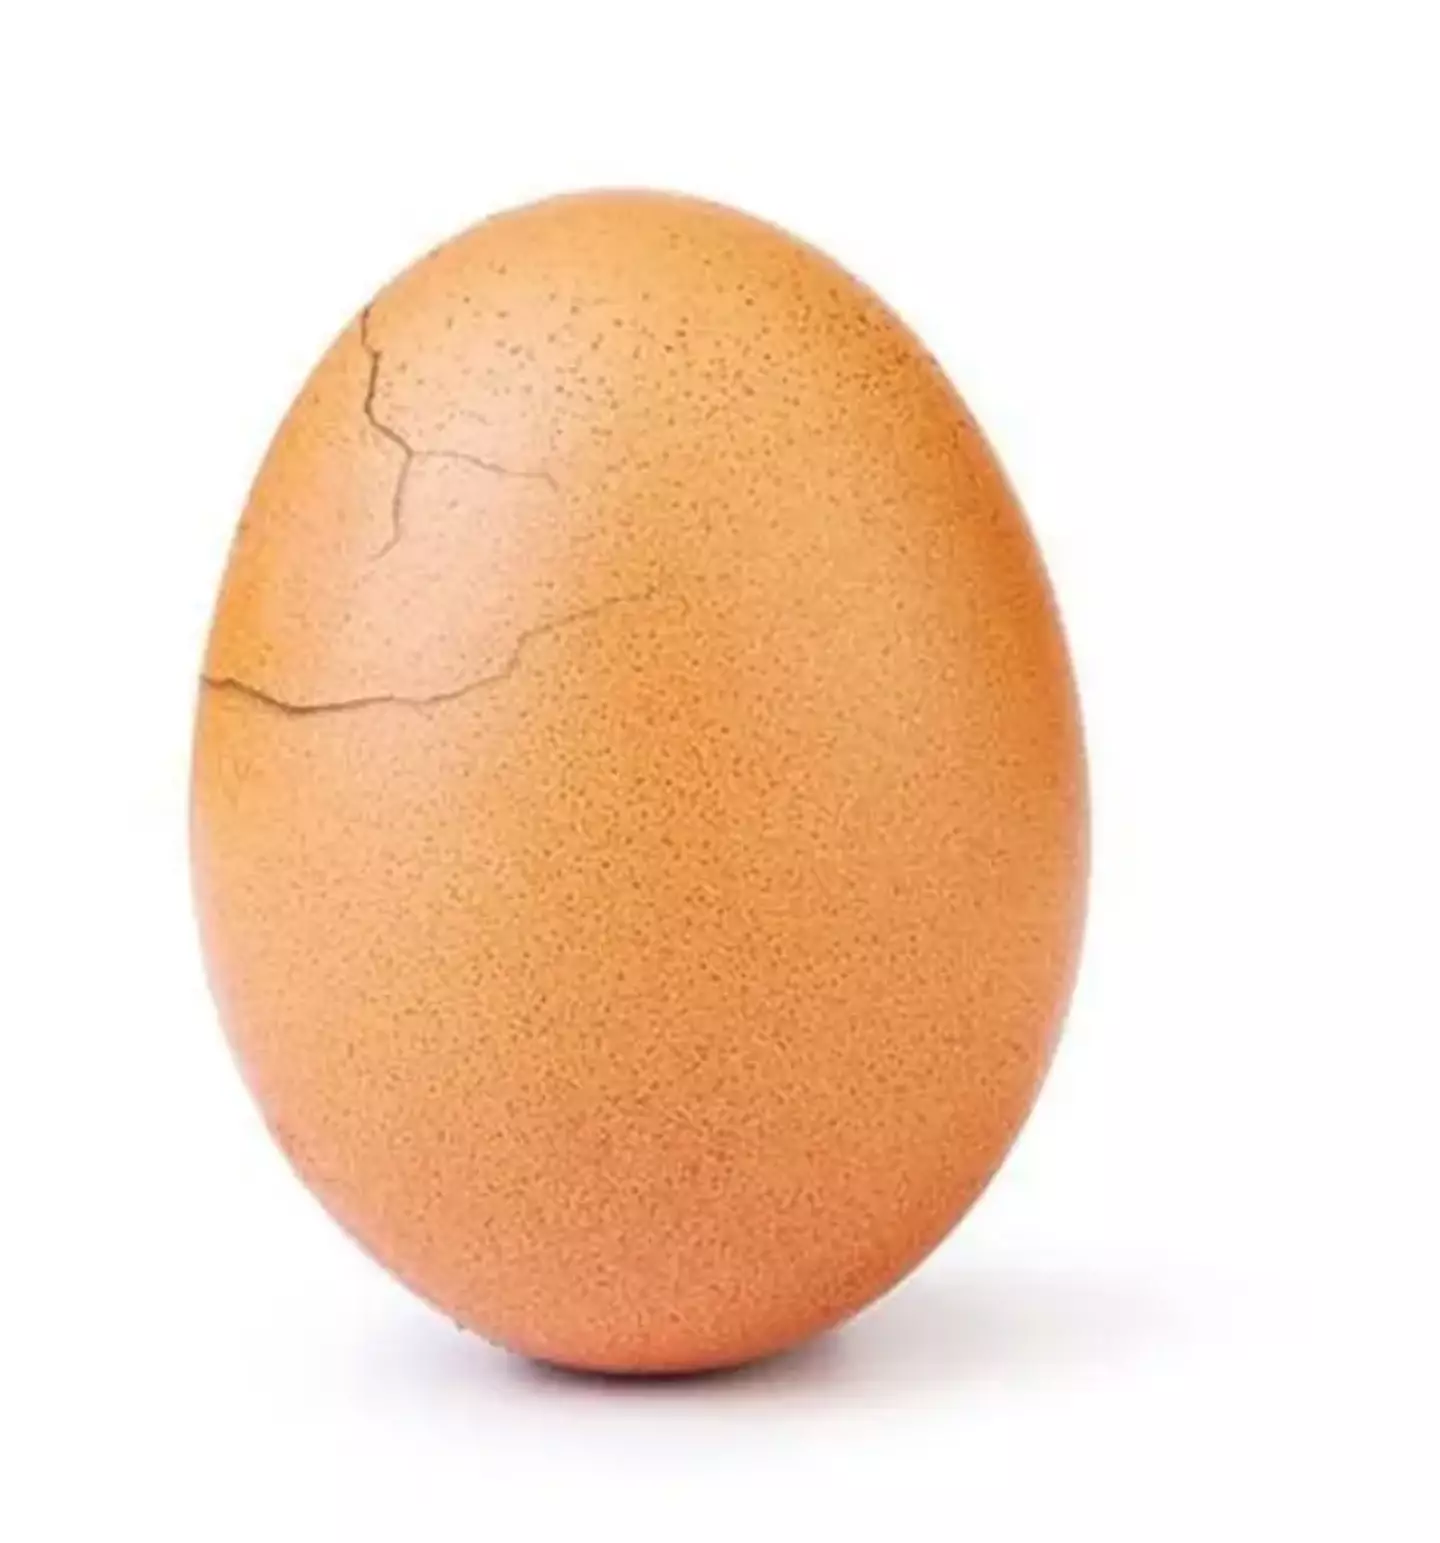 The iconic egg began to crack after becoming the most-liked.